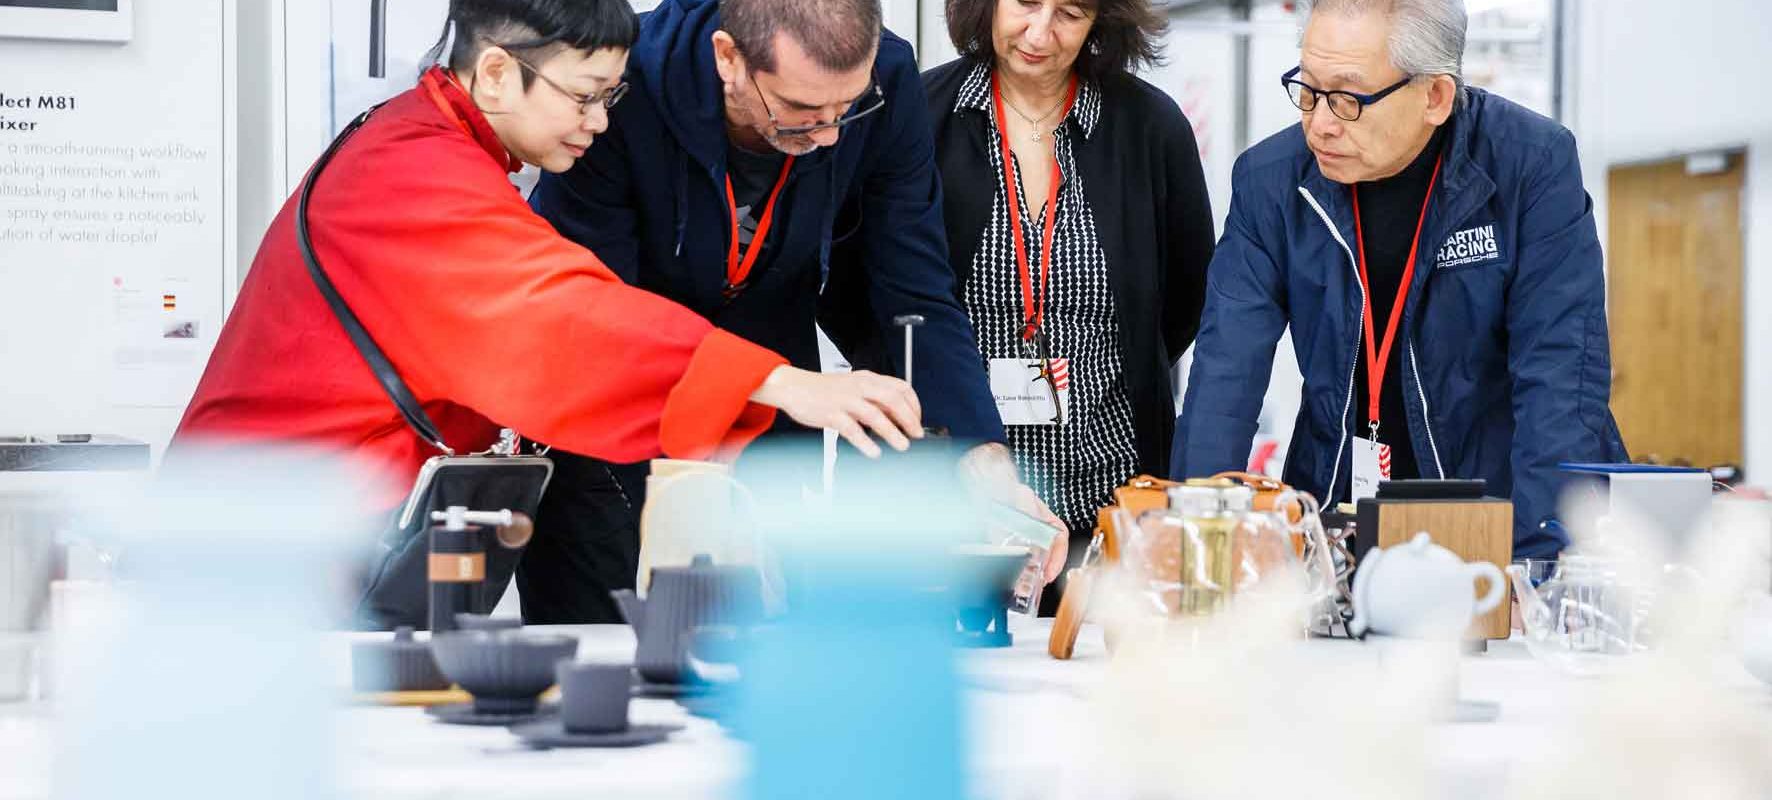 Red Dot Award: Product Design 2020, Jury Session